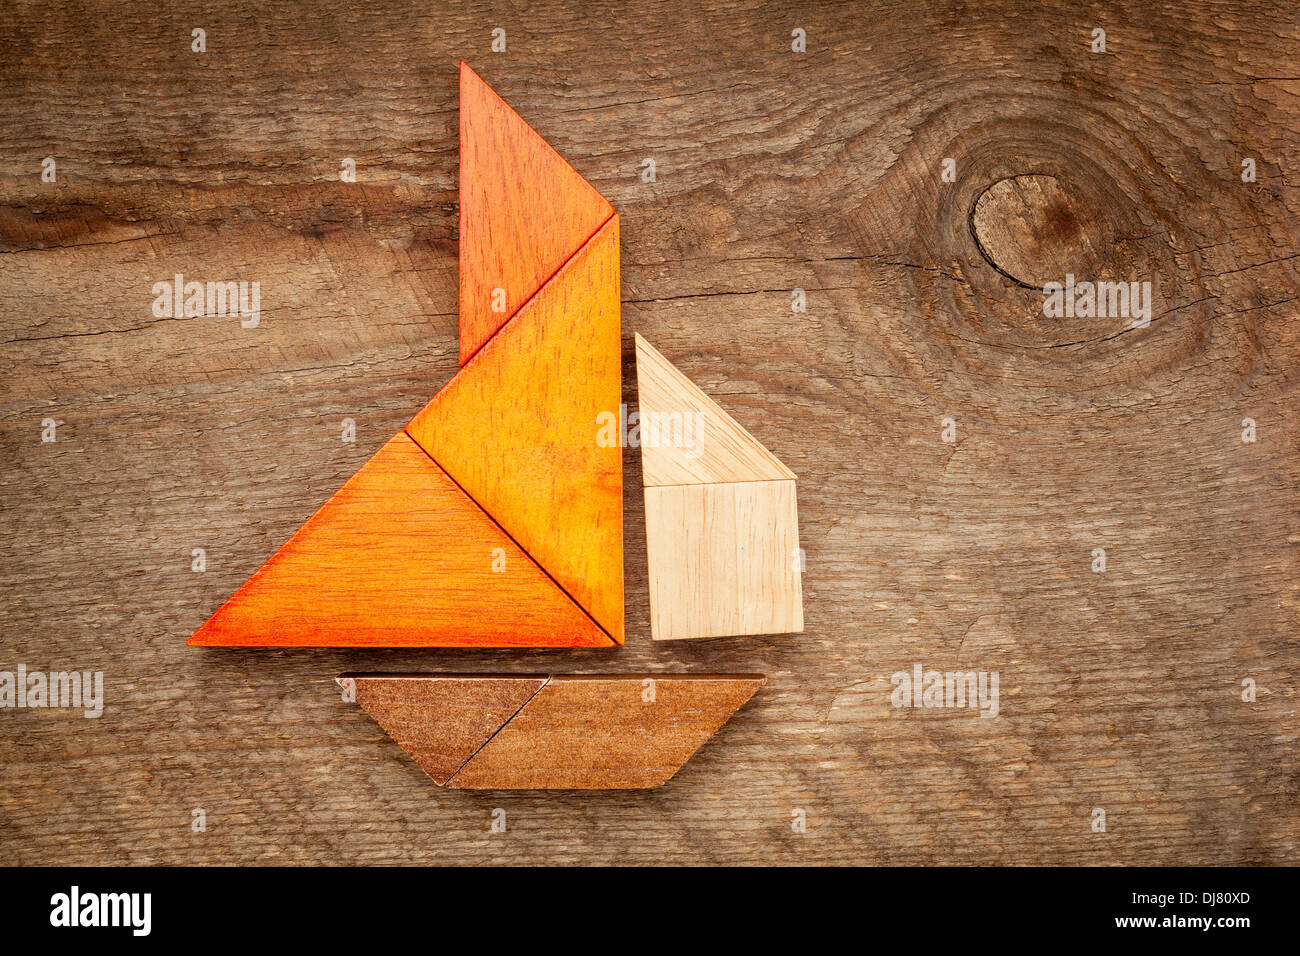 abstract picture of a sailing boat built from seven tangram wooden pieces over a rustic barn wood, Stock Photo